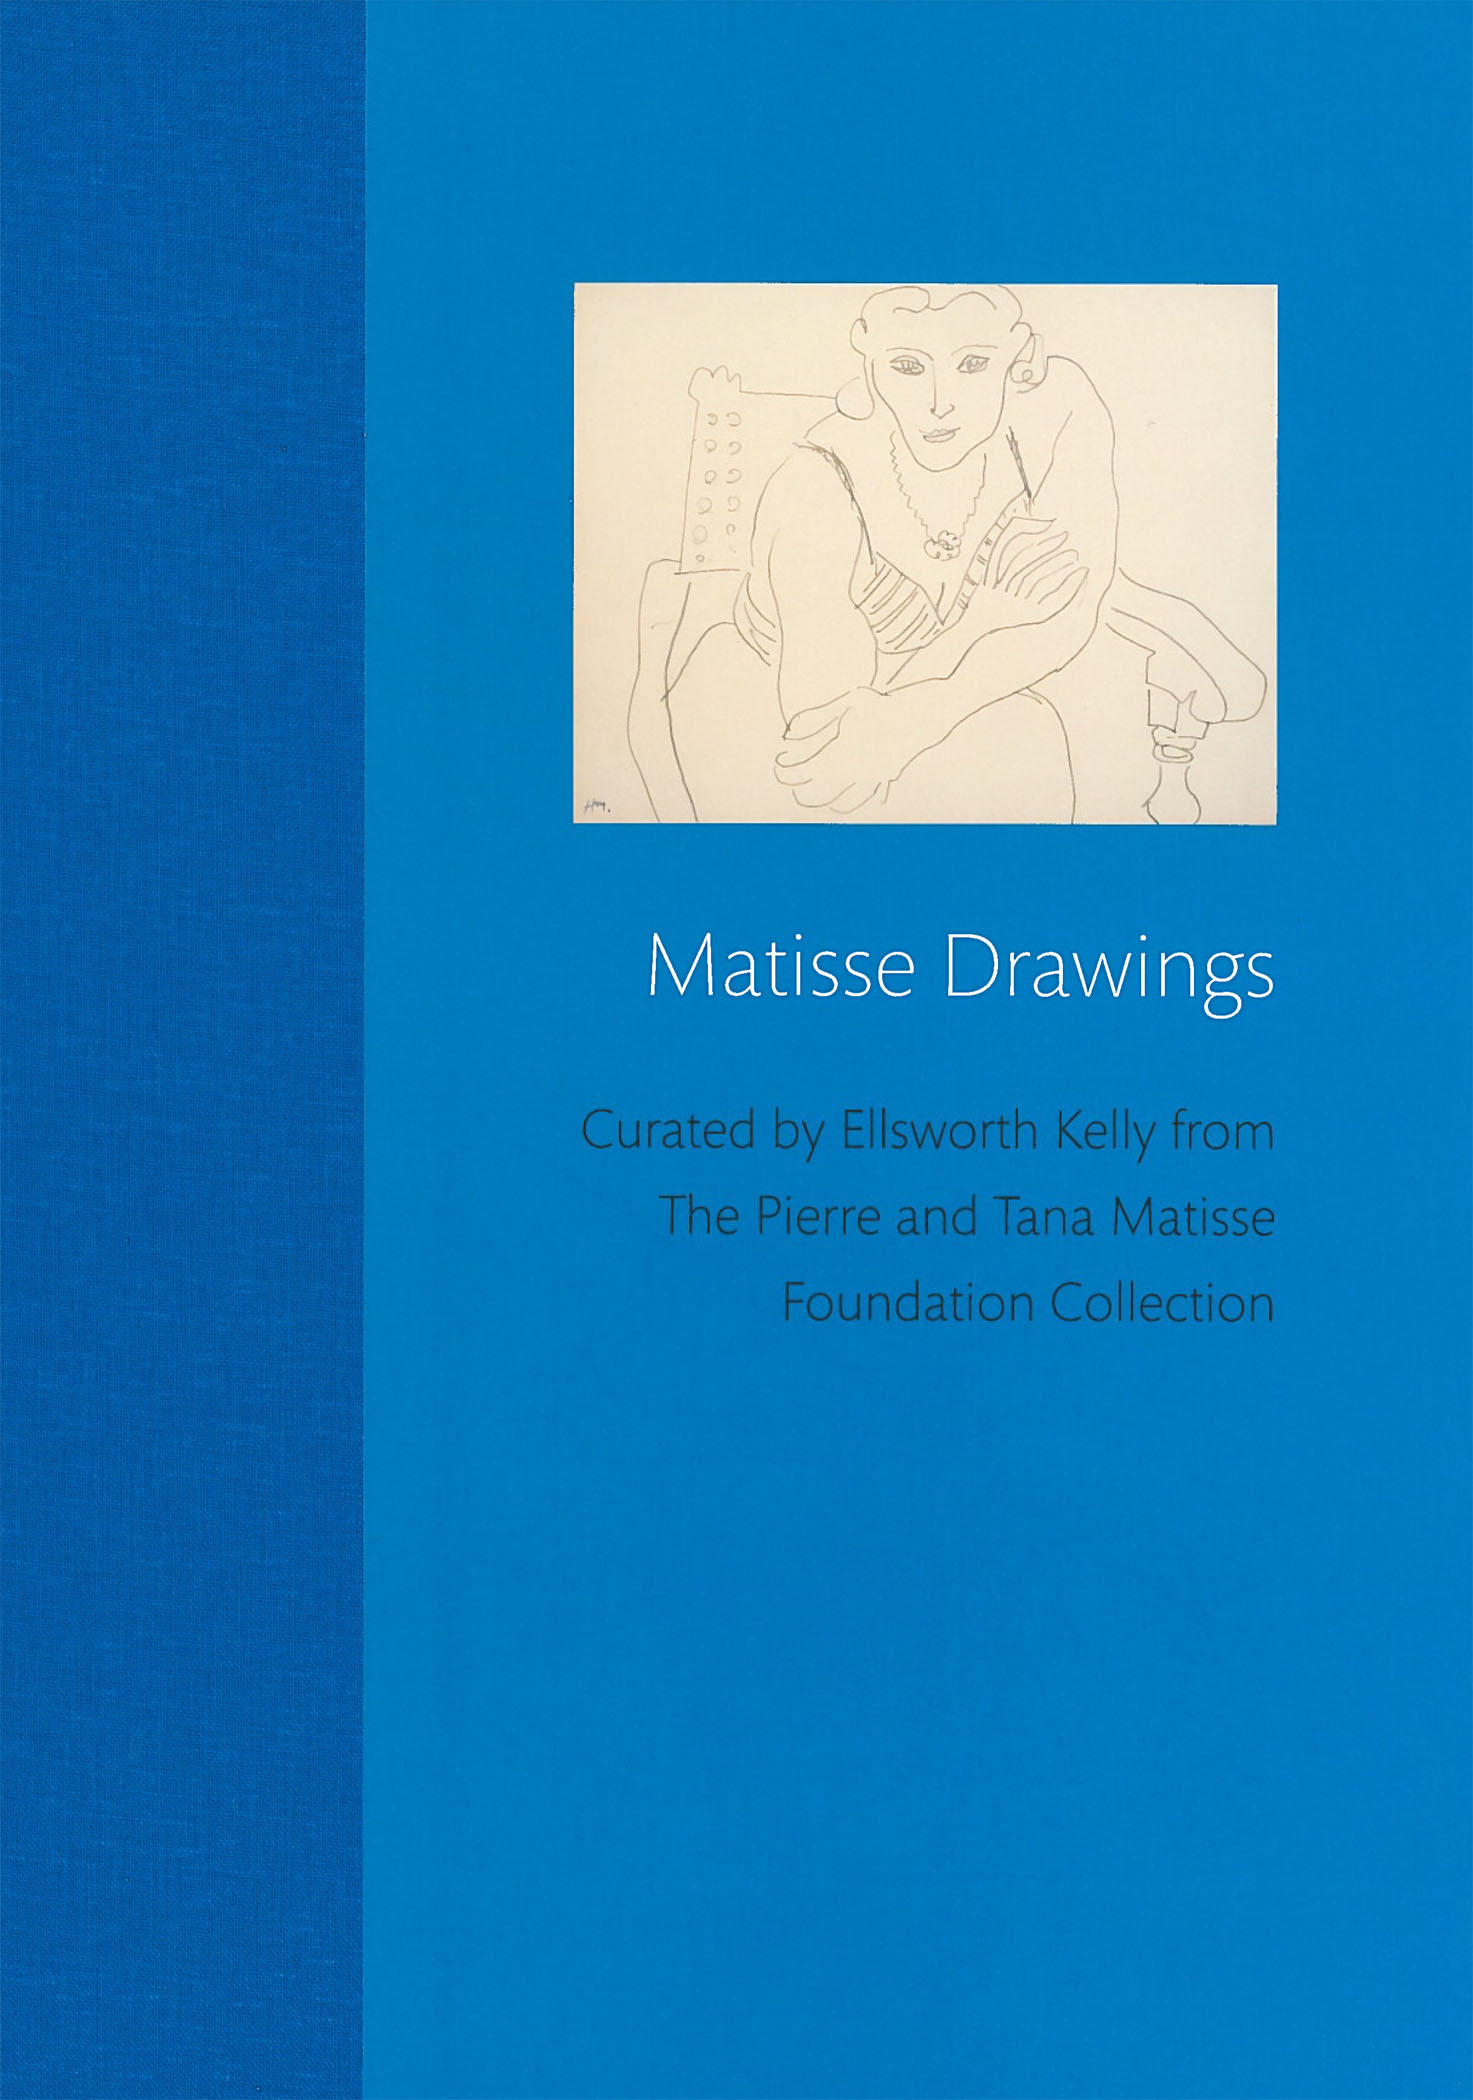 Matisse catalogue cover